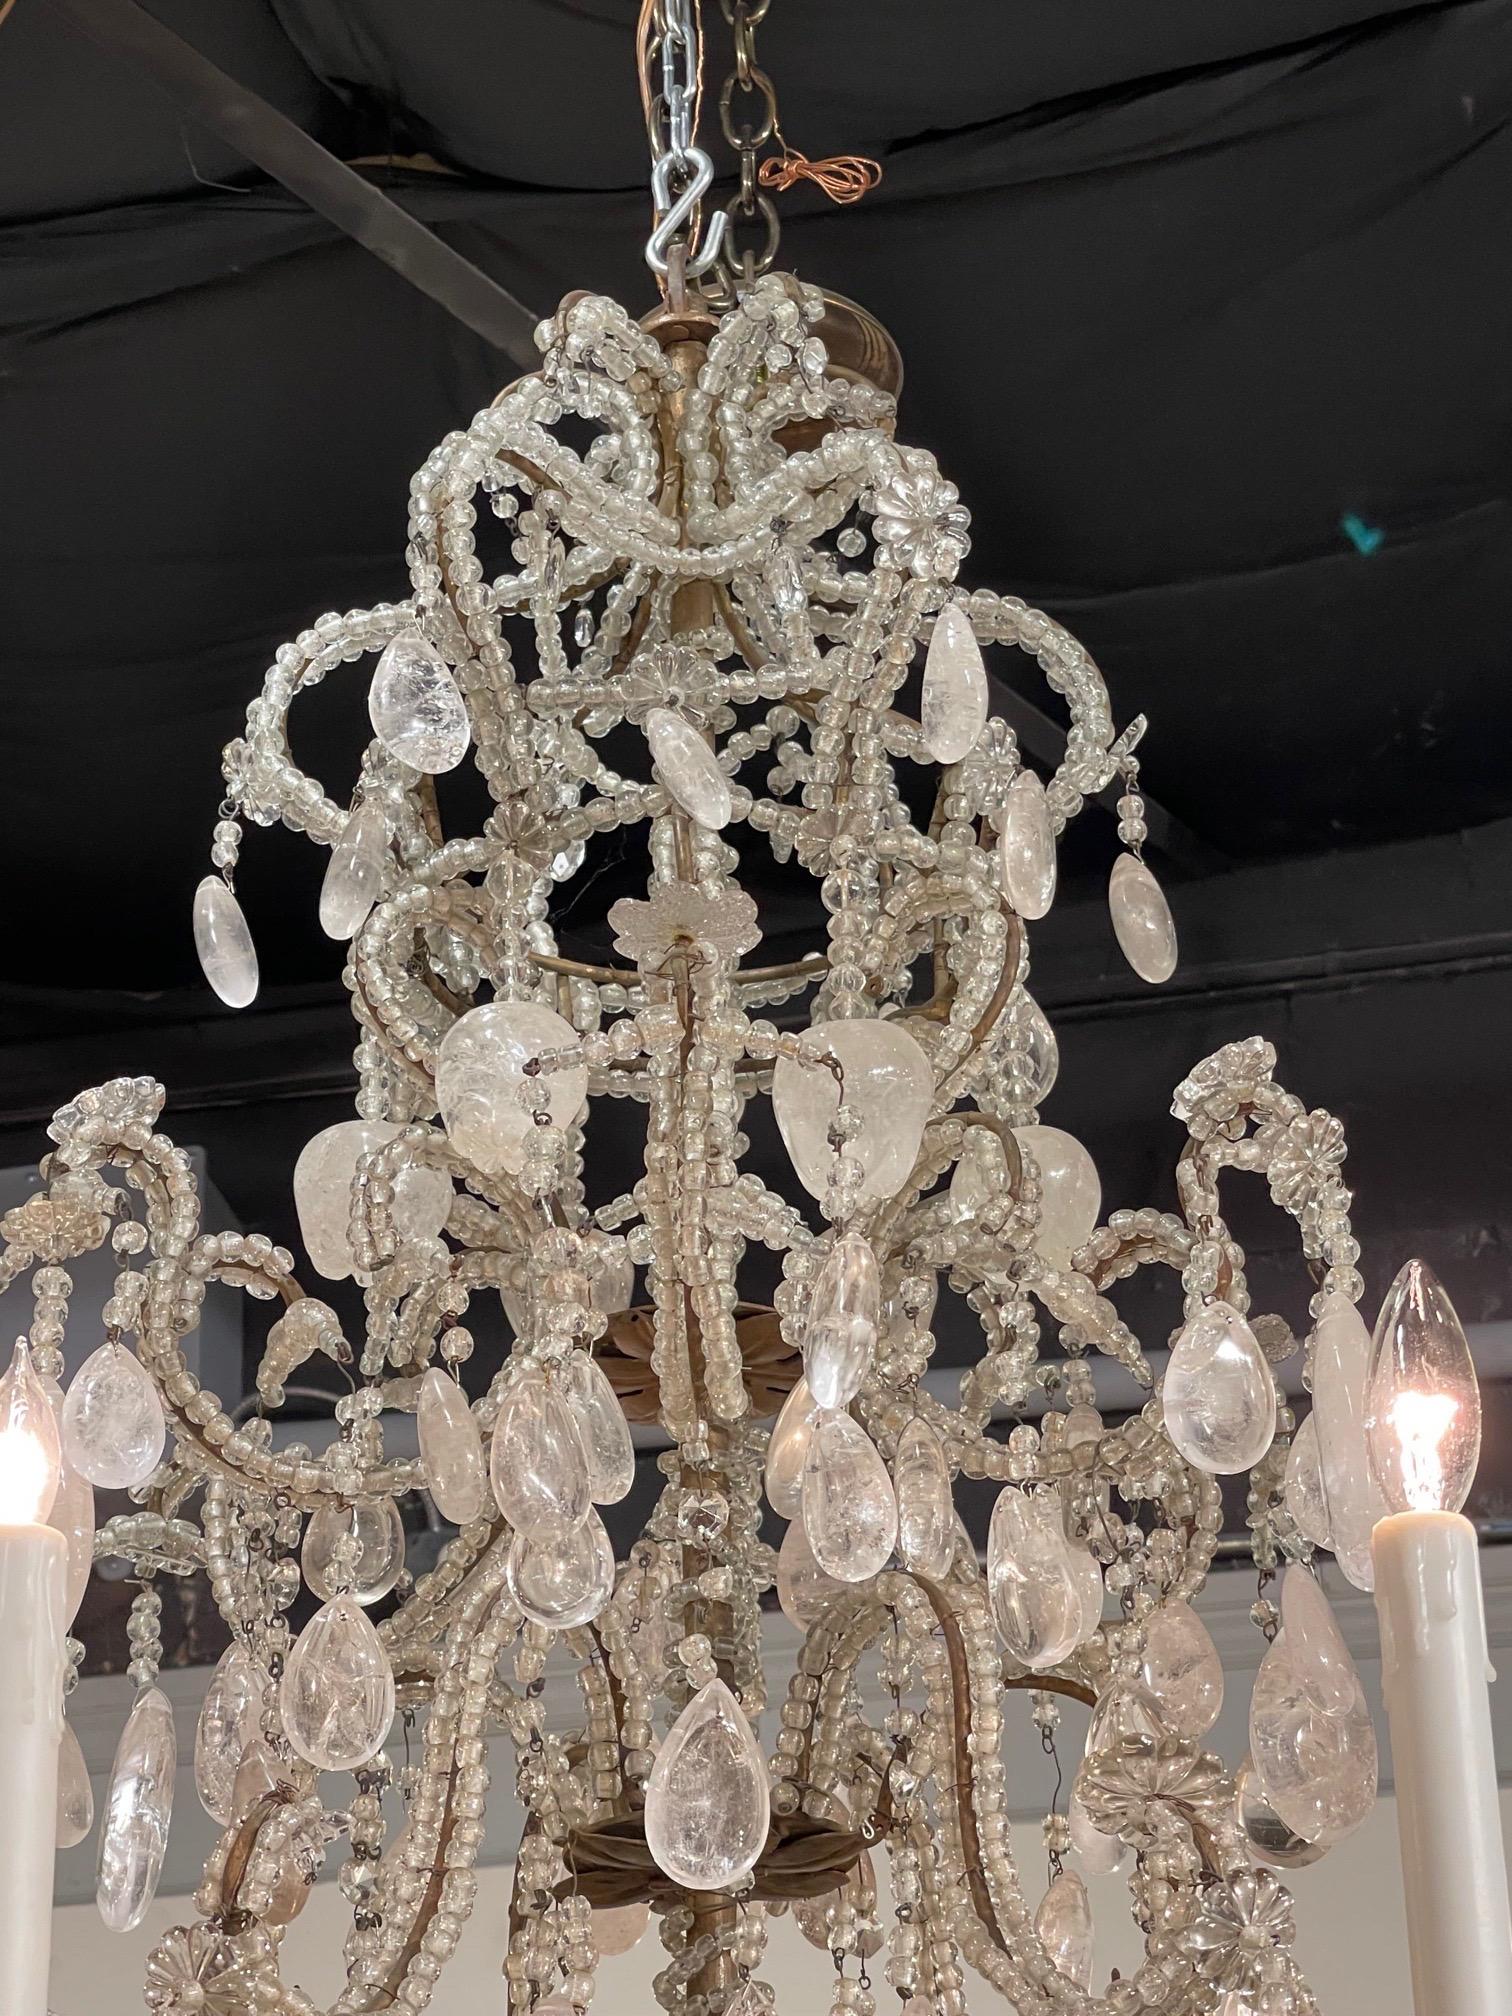 19th Century French Rock Crystal Chandelier with 6 Lights In Good Condition For Sale In Dallas, TX